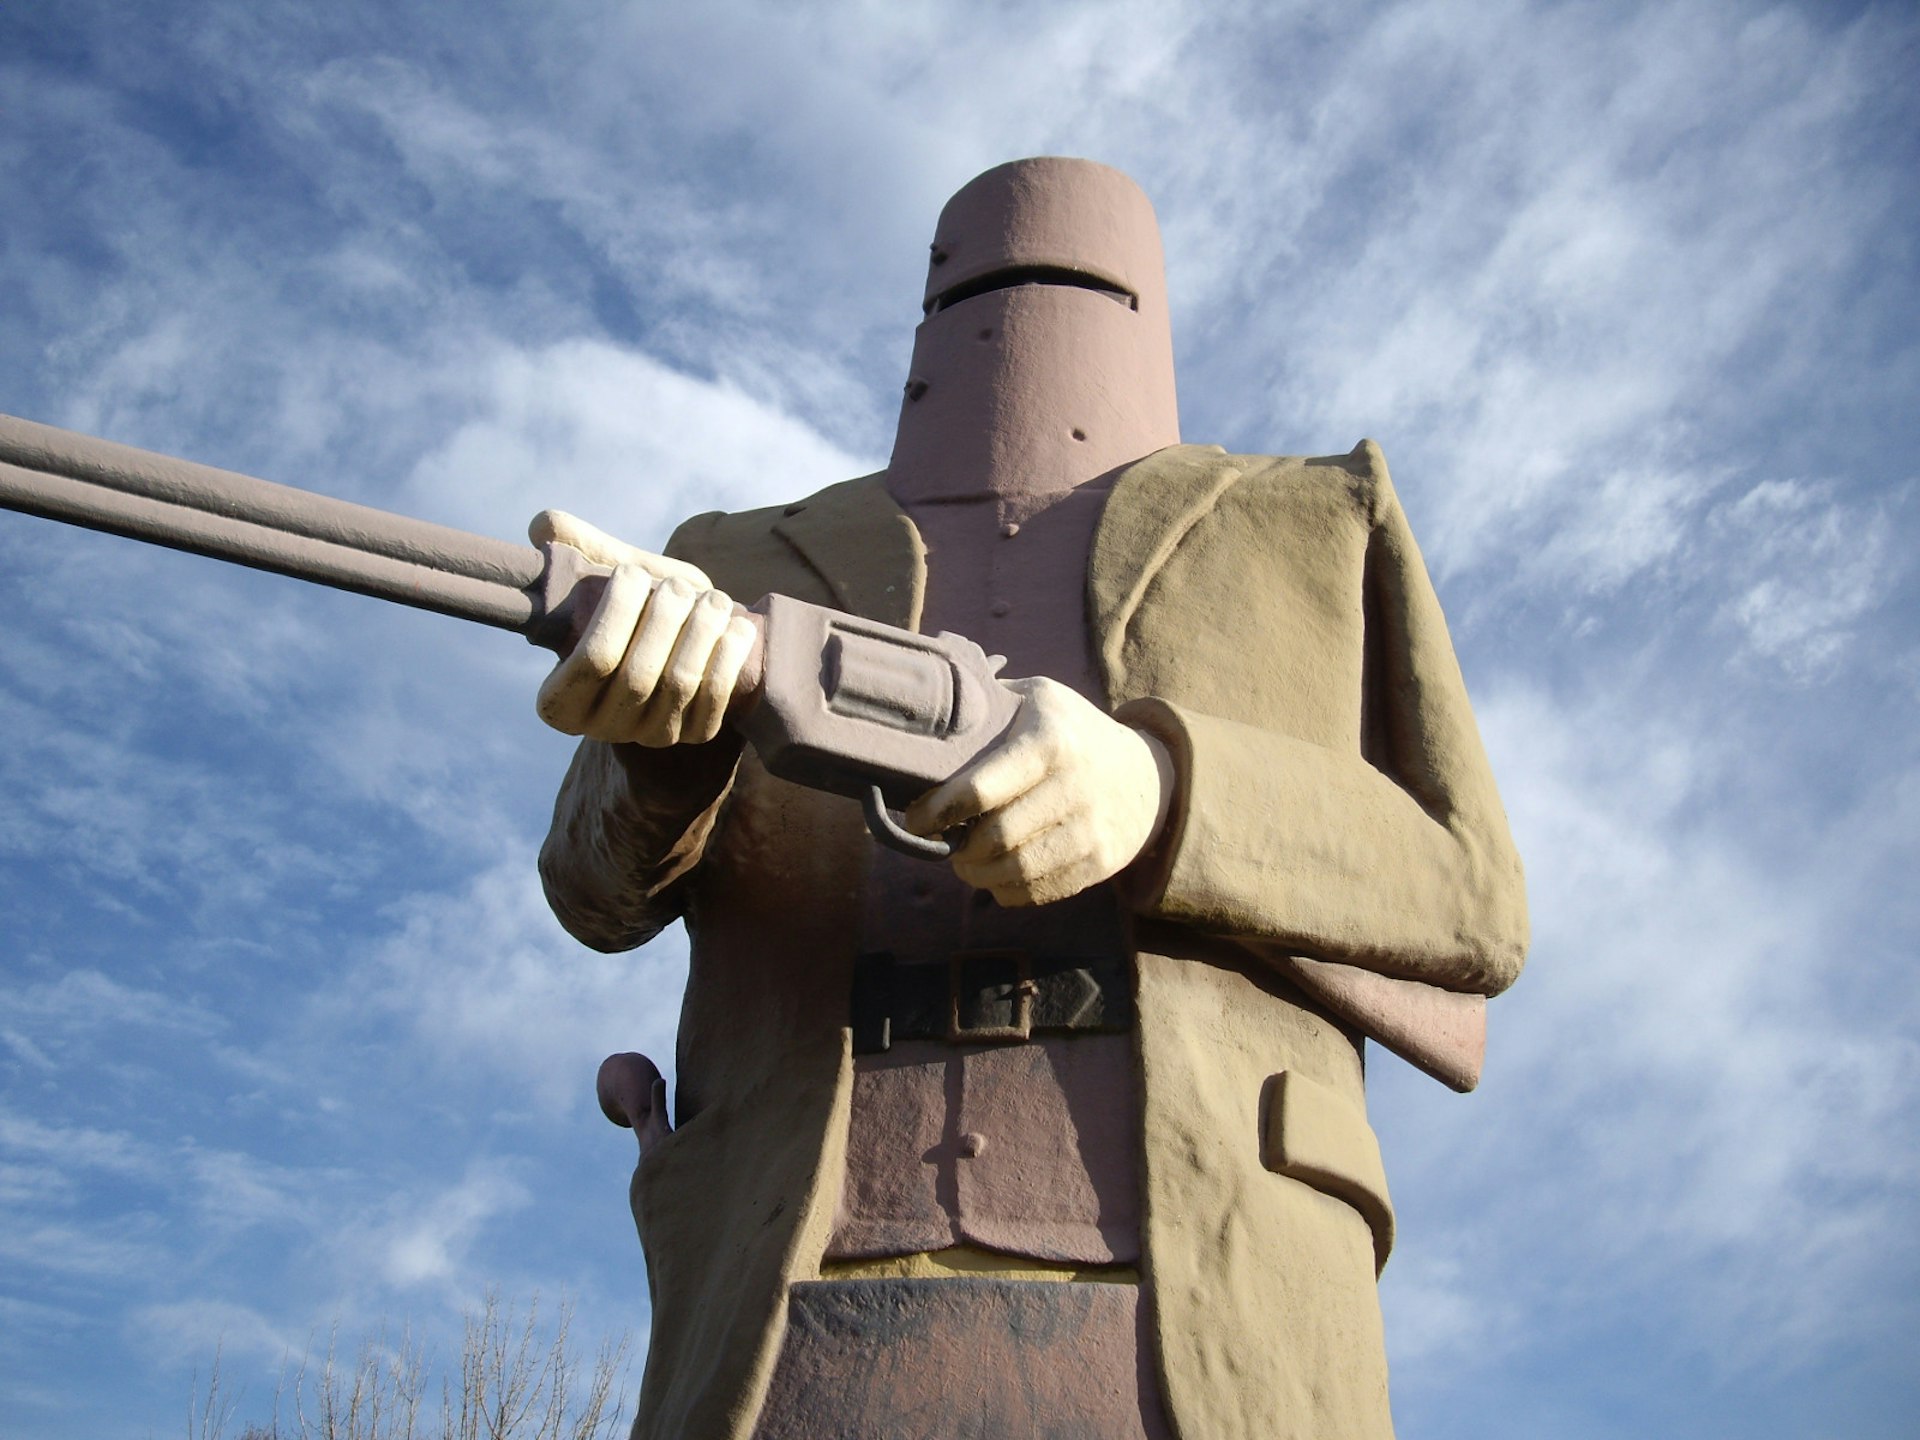 The monument of Ned Kelly wearing his bucket helmet and holding a shot gun at Glenrowan, Australia